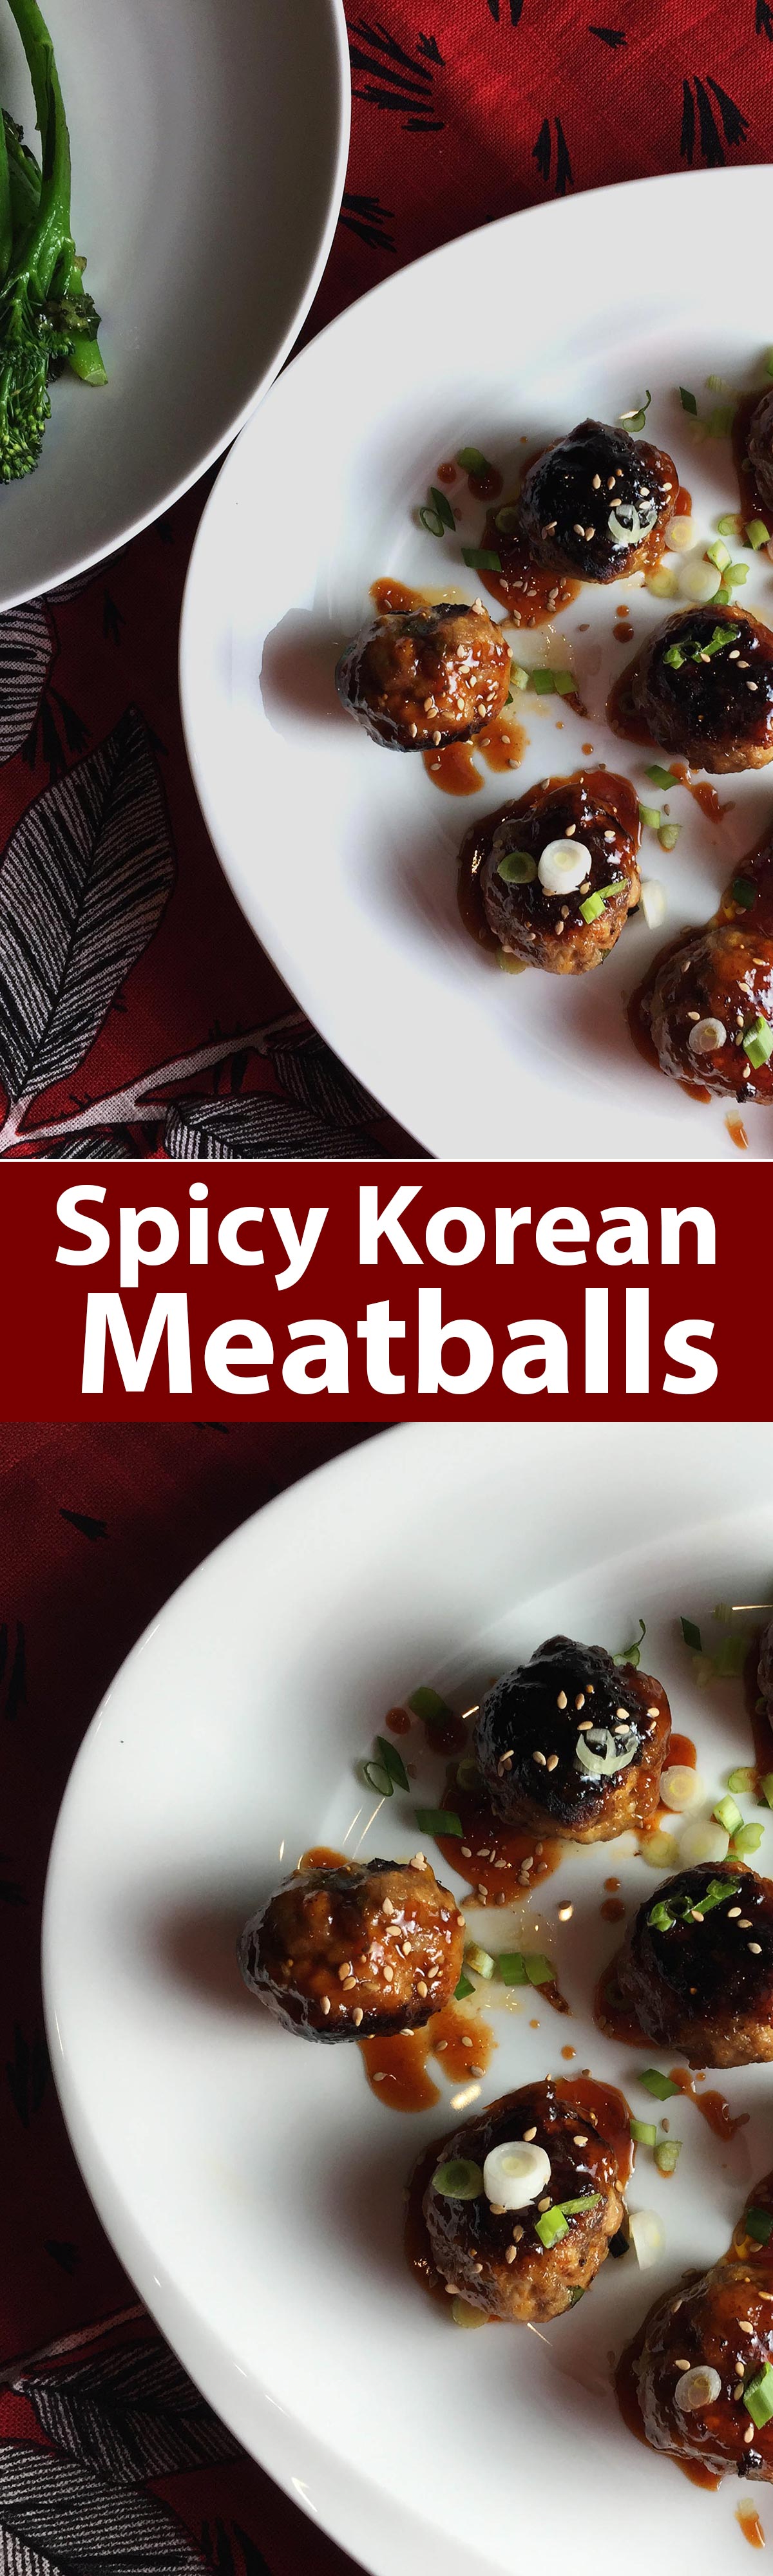 These spicy Korean meatballs with Gochujang work perfectly on a busy weeknight or your SuperBowl buffet. Inspired by a Foxes Love Lemons recipe on Food52